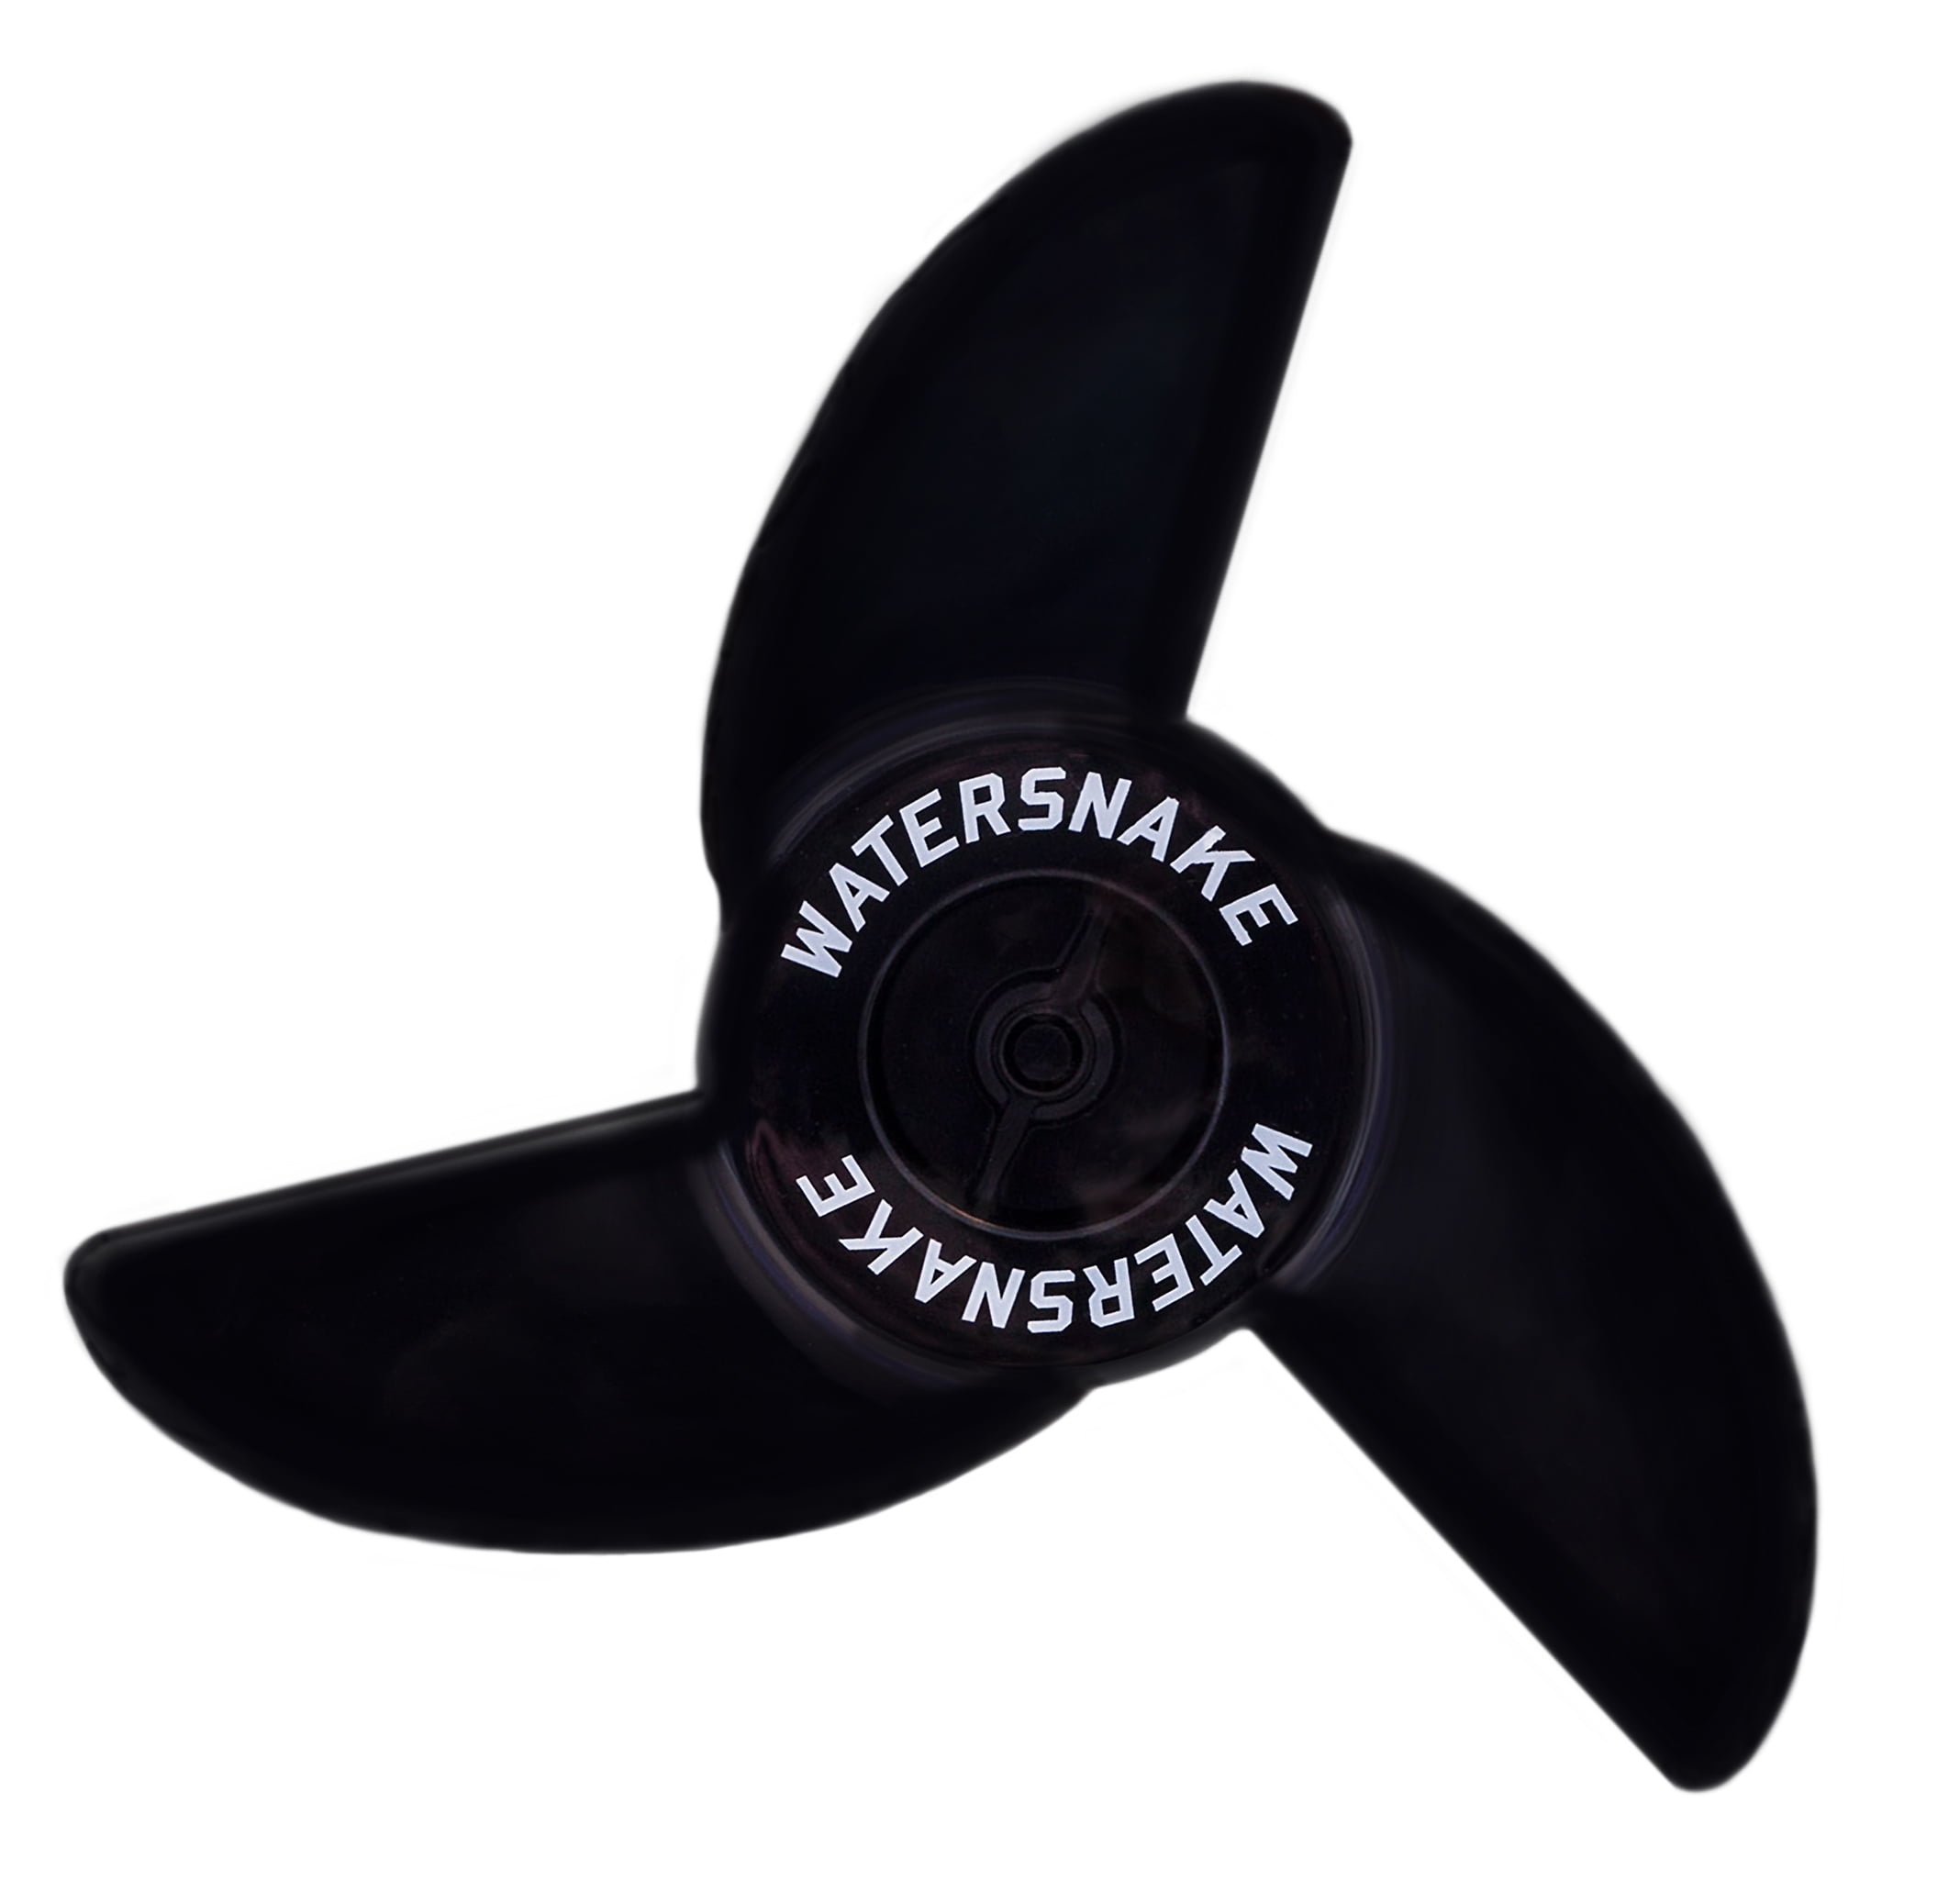 Watersnake Replacement Two Blade Mini Propeller for Electric Trolling Motor 